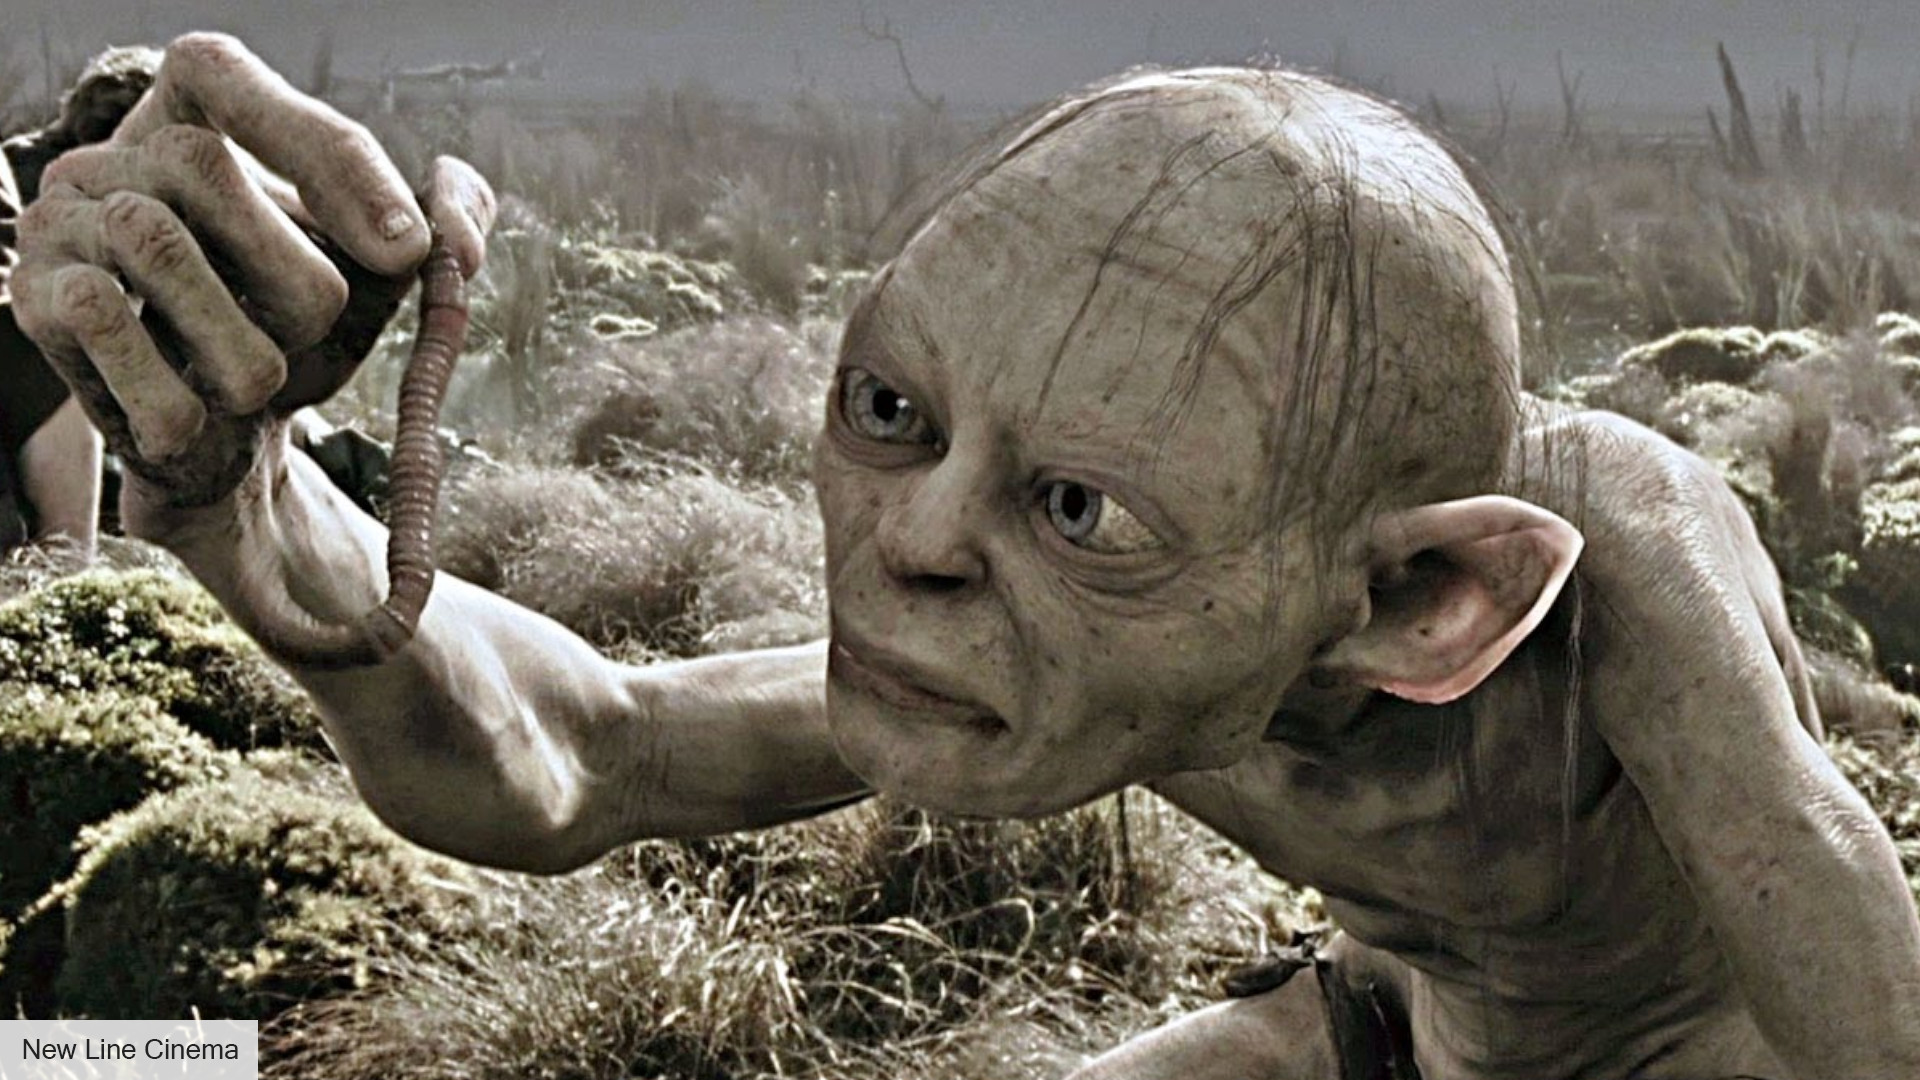 Lord of the Rings Characters Ranked: Who is the Most Popular LOTR Character?  - MySmartPrice